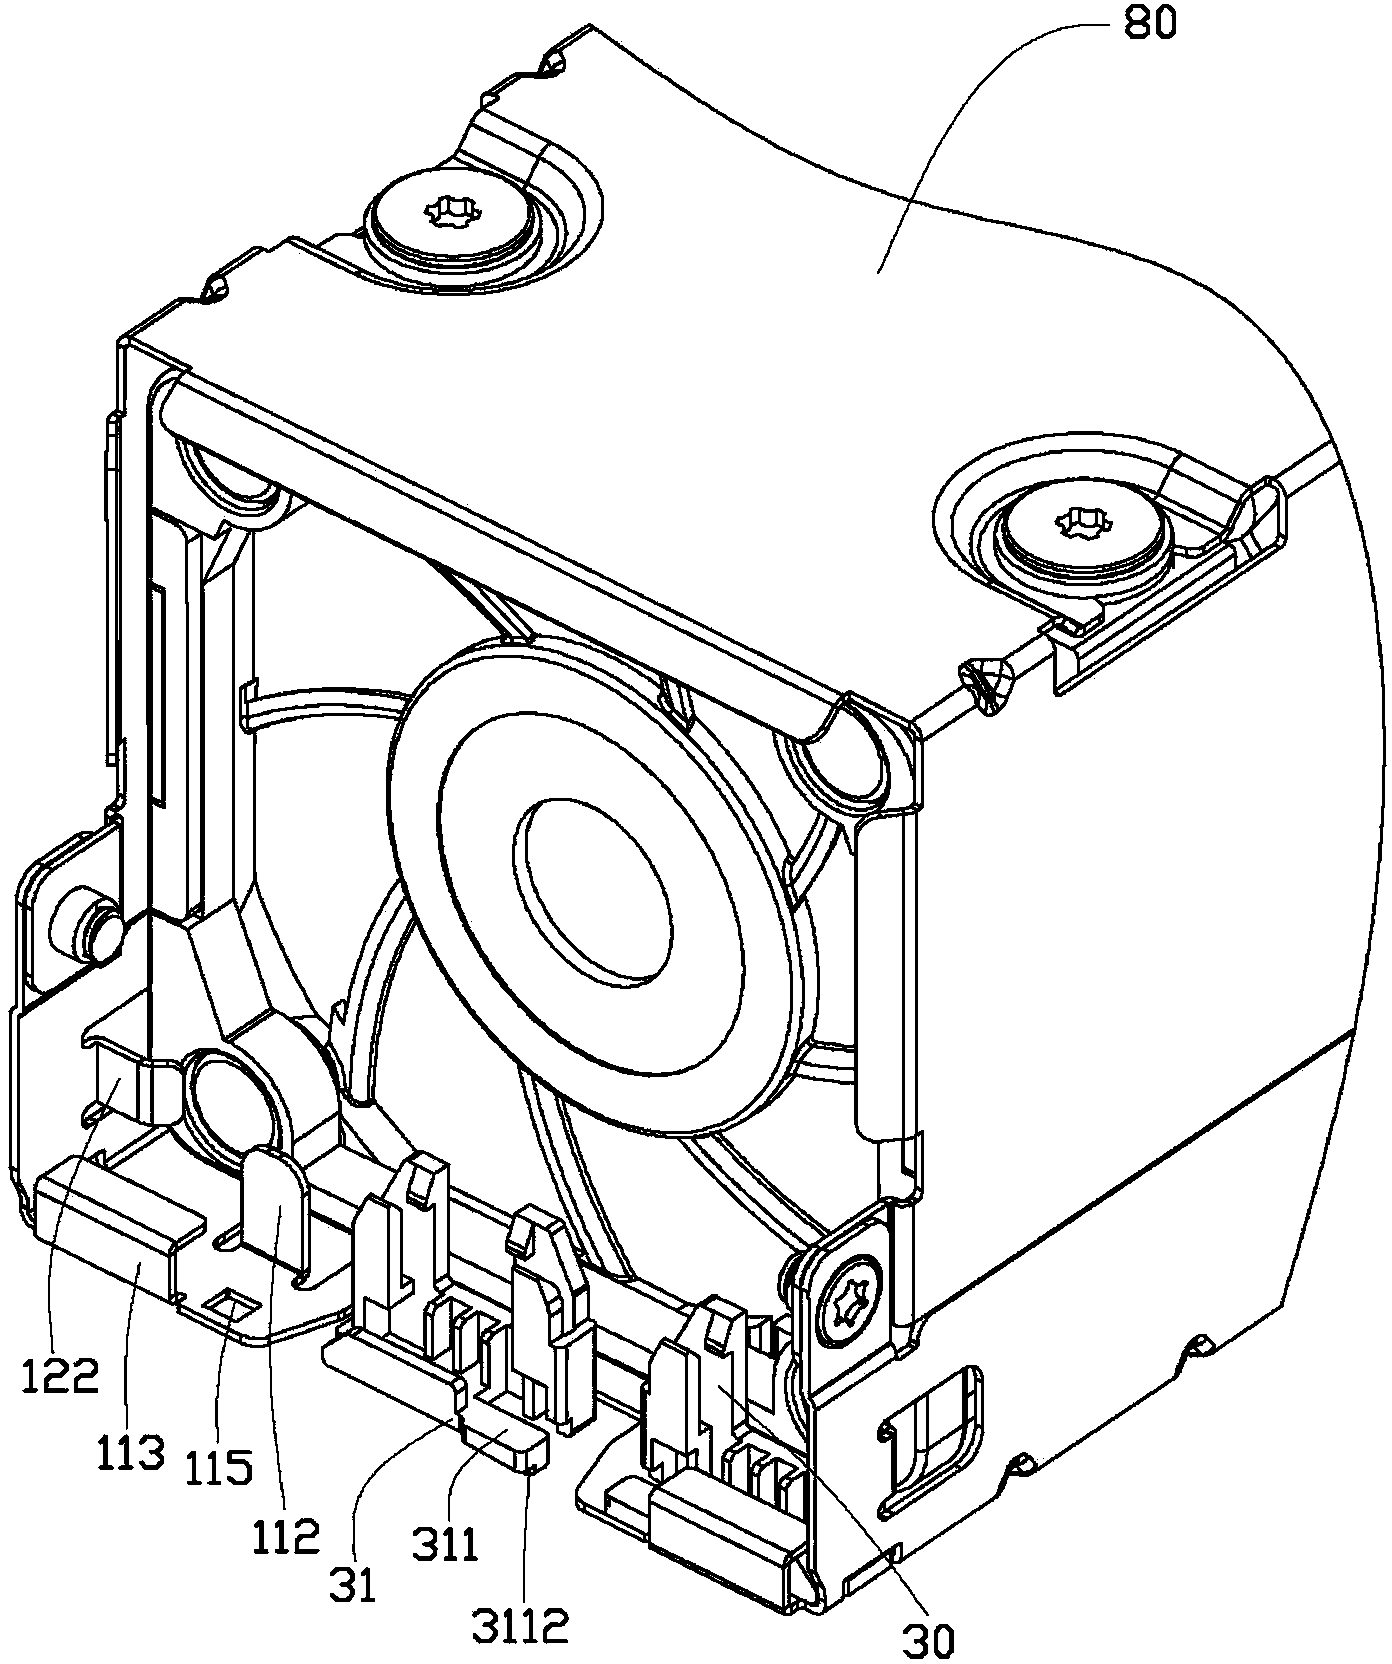 Connector fixation device